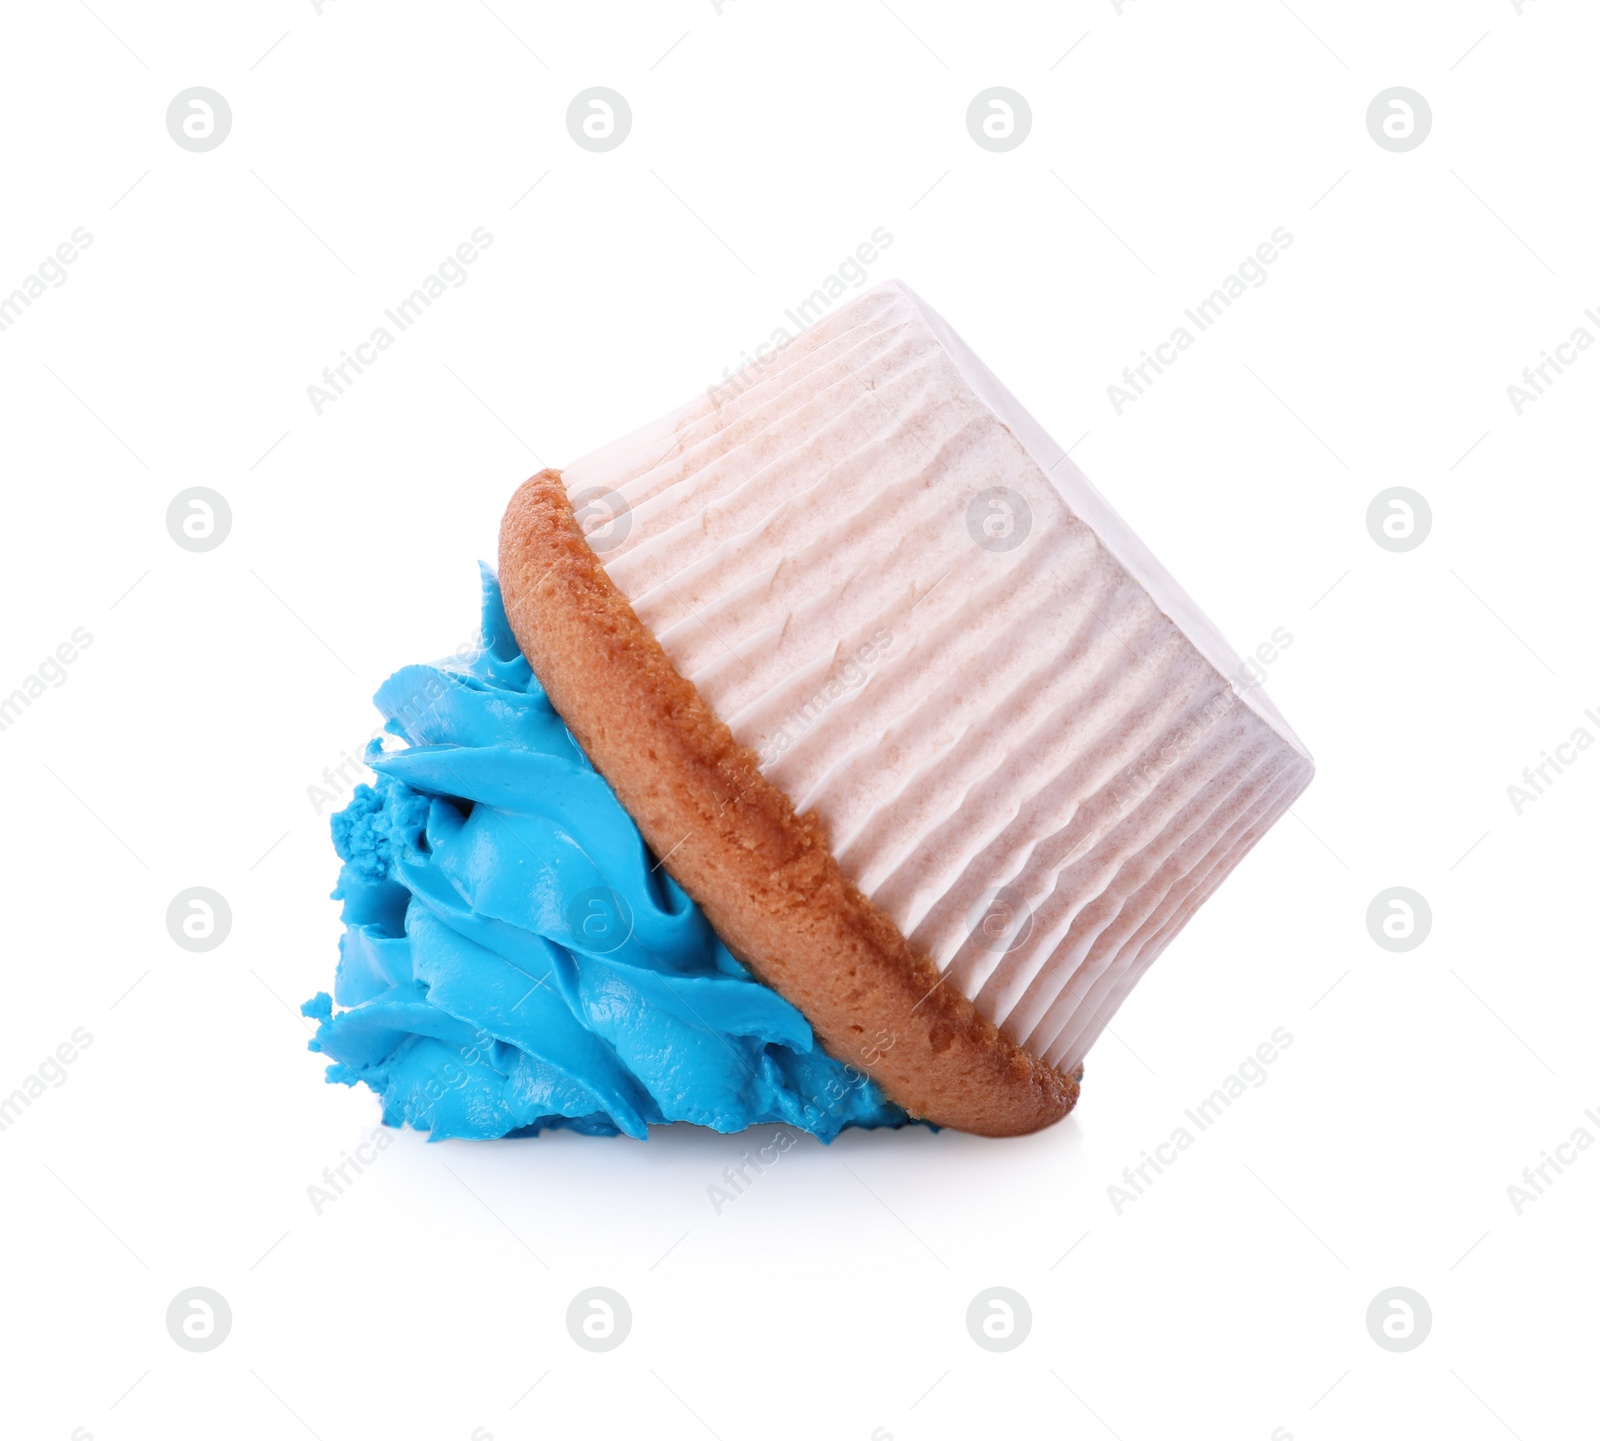 Photo of Dropped cupcake with cream on white background. Troubles happen